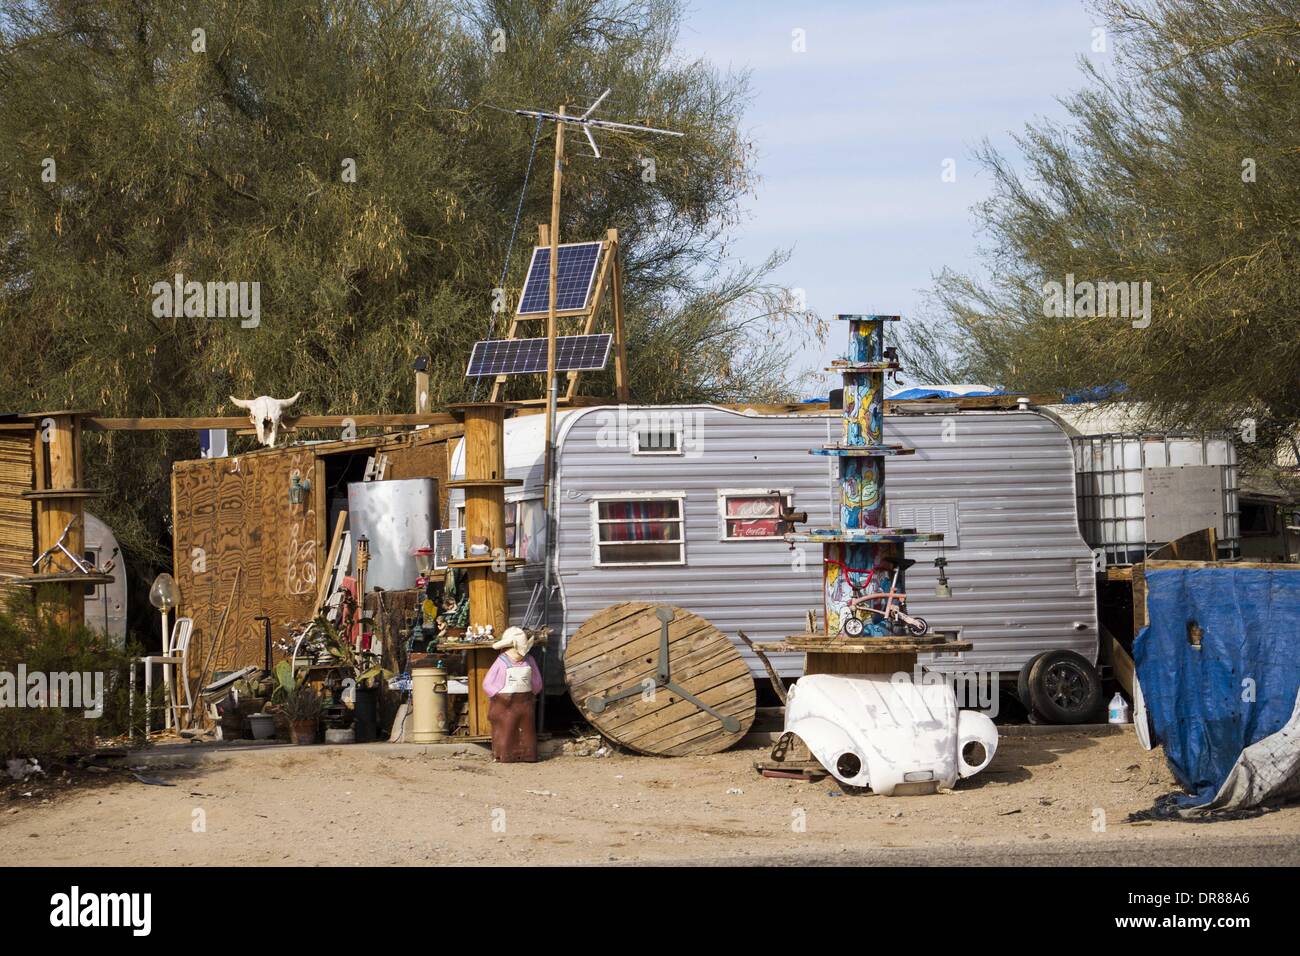 Jan. 4, 2014 - Palm Springs, California, U.S - A mobile home is seen on  January 4, 2014, in Slab City, California. Slab City or The Slabs is a snowbird campsite in the Colorado Desert in southeastern California, used by recreational vehicle owners and squatters from across North America. It takes its name from the concrete slabs that remain from the abandoned World War II Marine barracks of Camp Dunlap. (Credit Image: © Ringo Chiu/ZUMAPRESS.com) Stock Photo